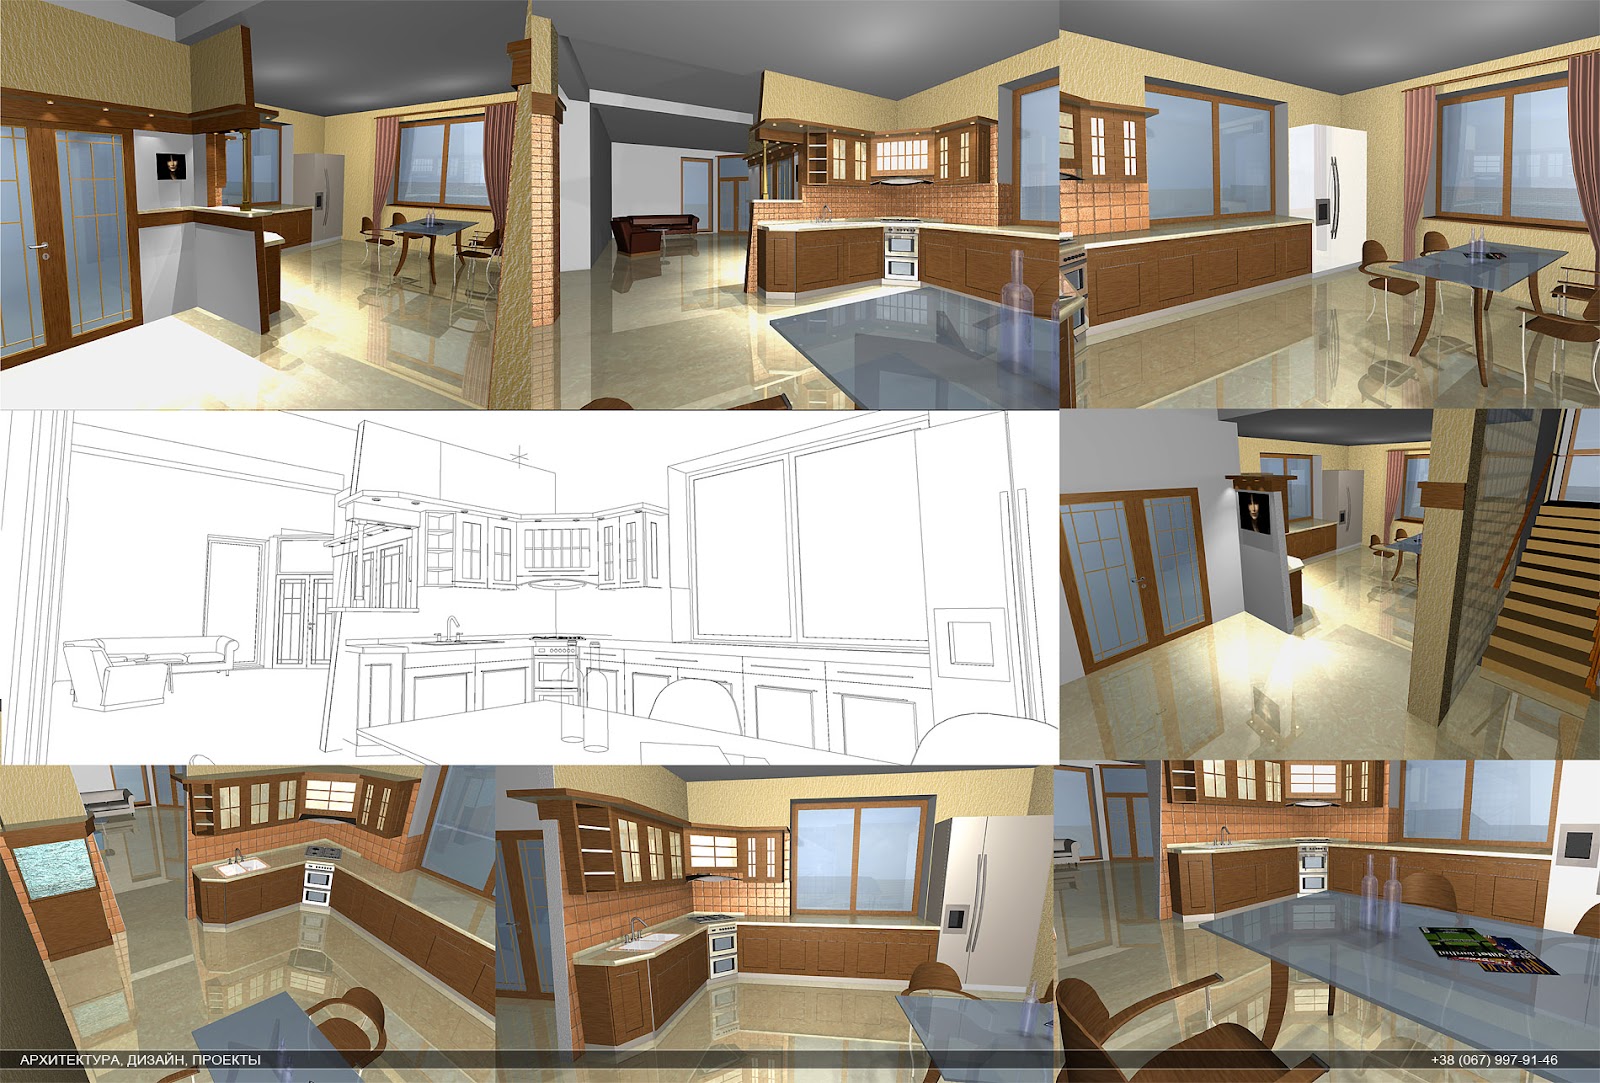 Architecture Design 3d Modeling February 2012